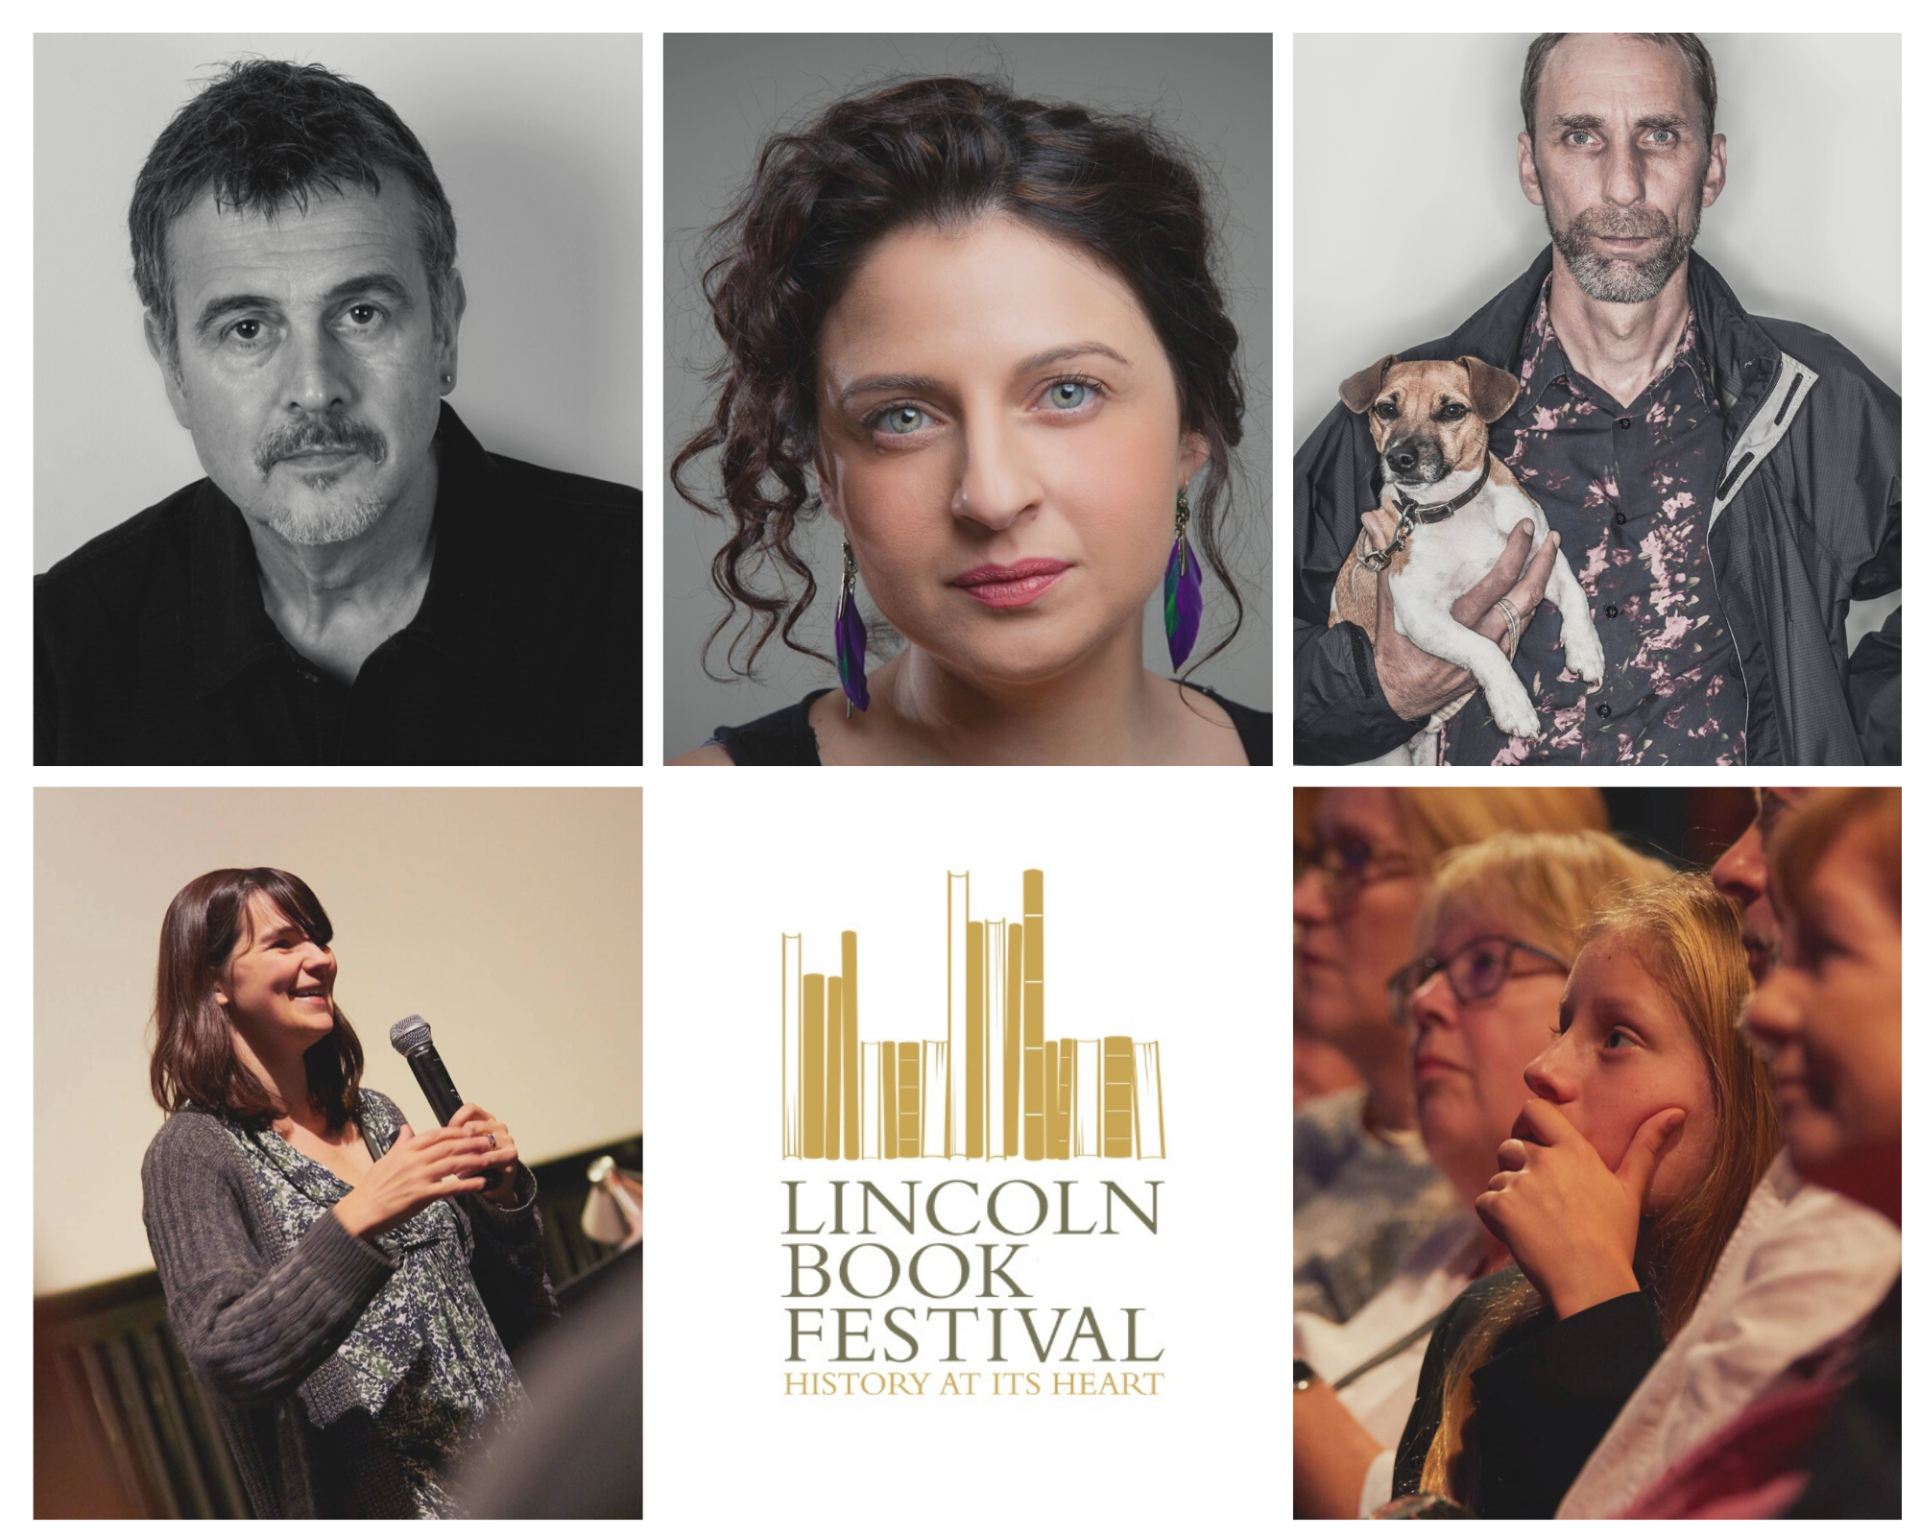 Lincoln Book Festival author image montage